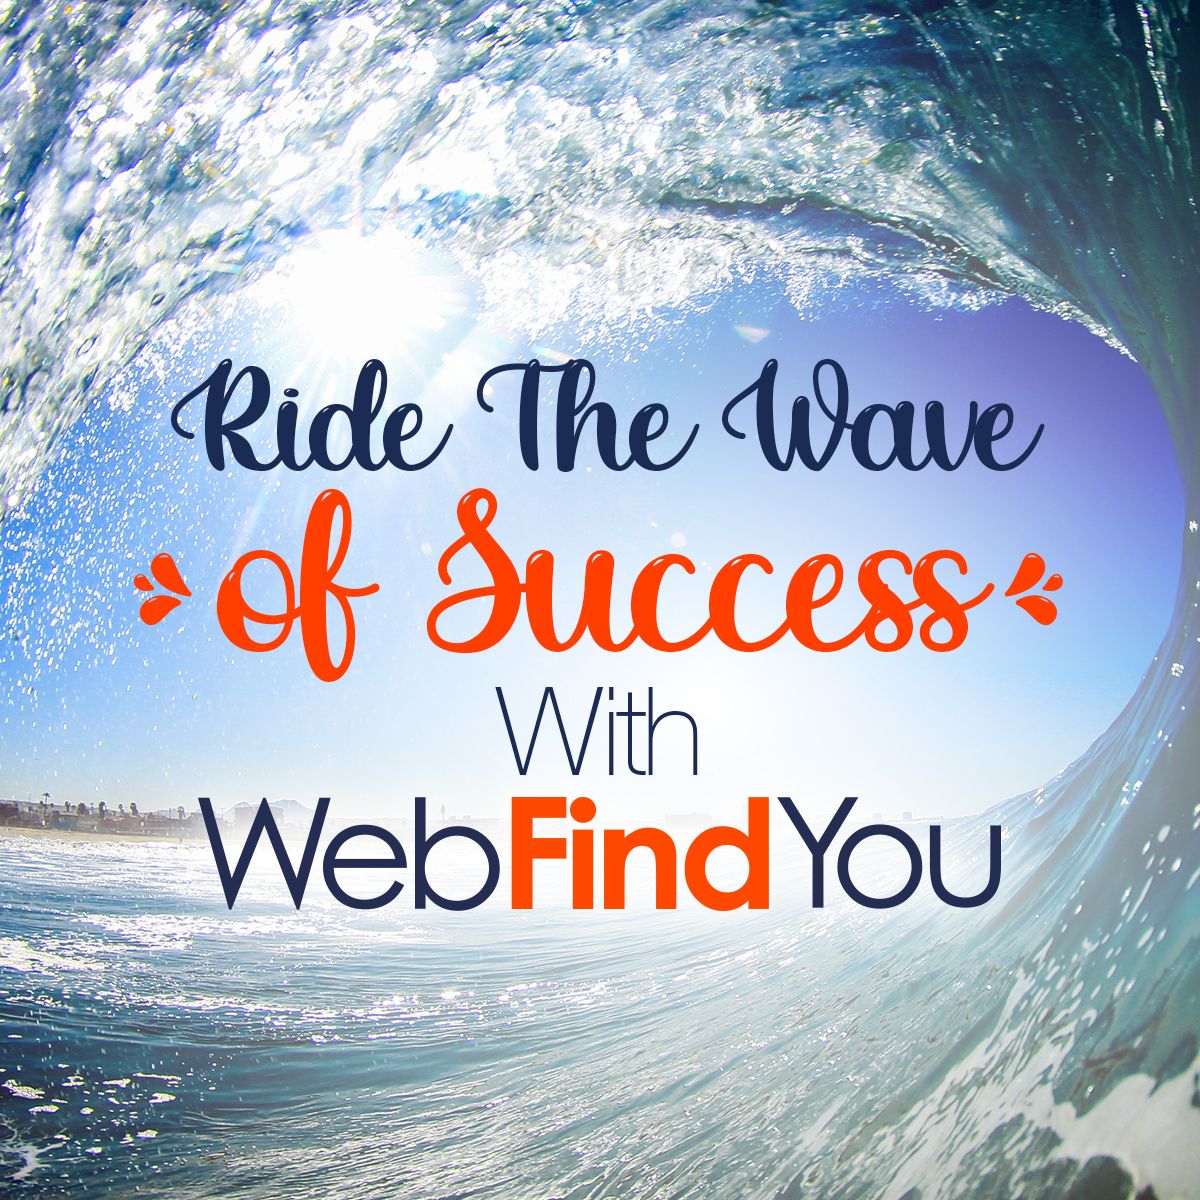 Ride The Wave Of Success With WebFindYou